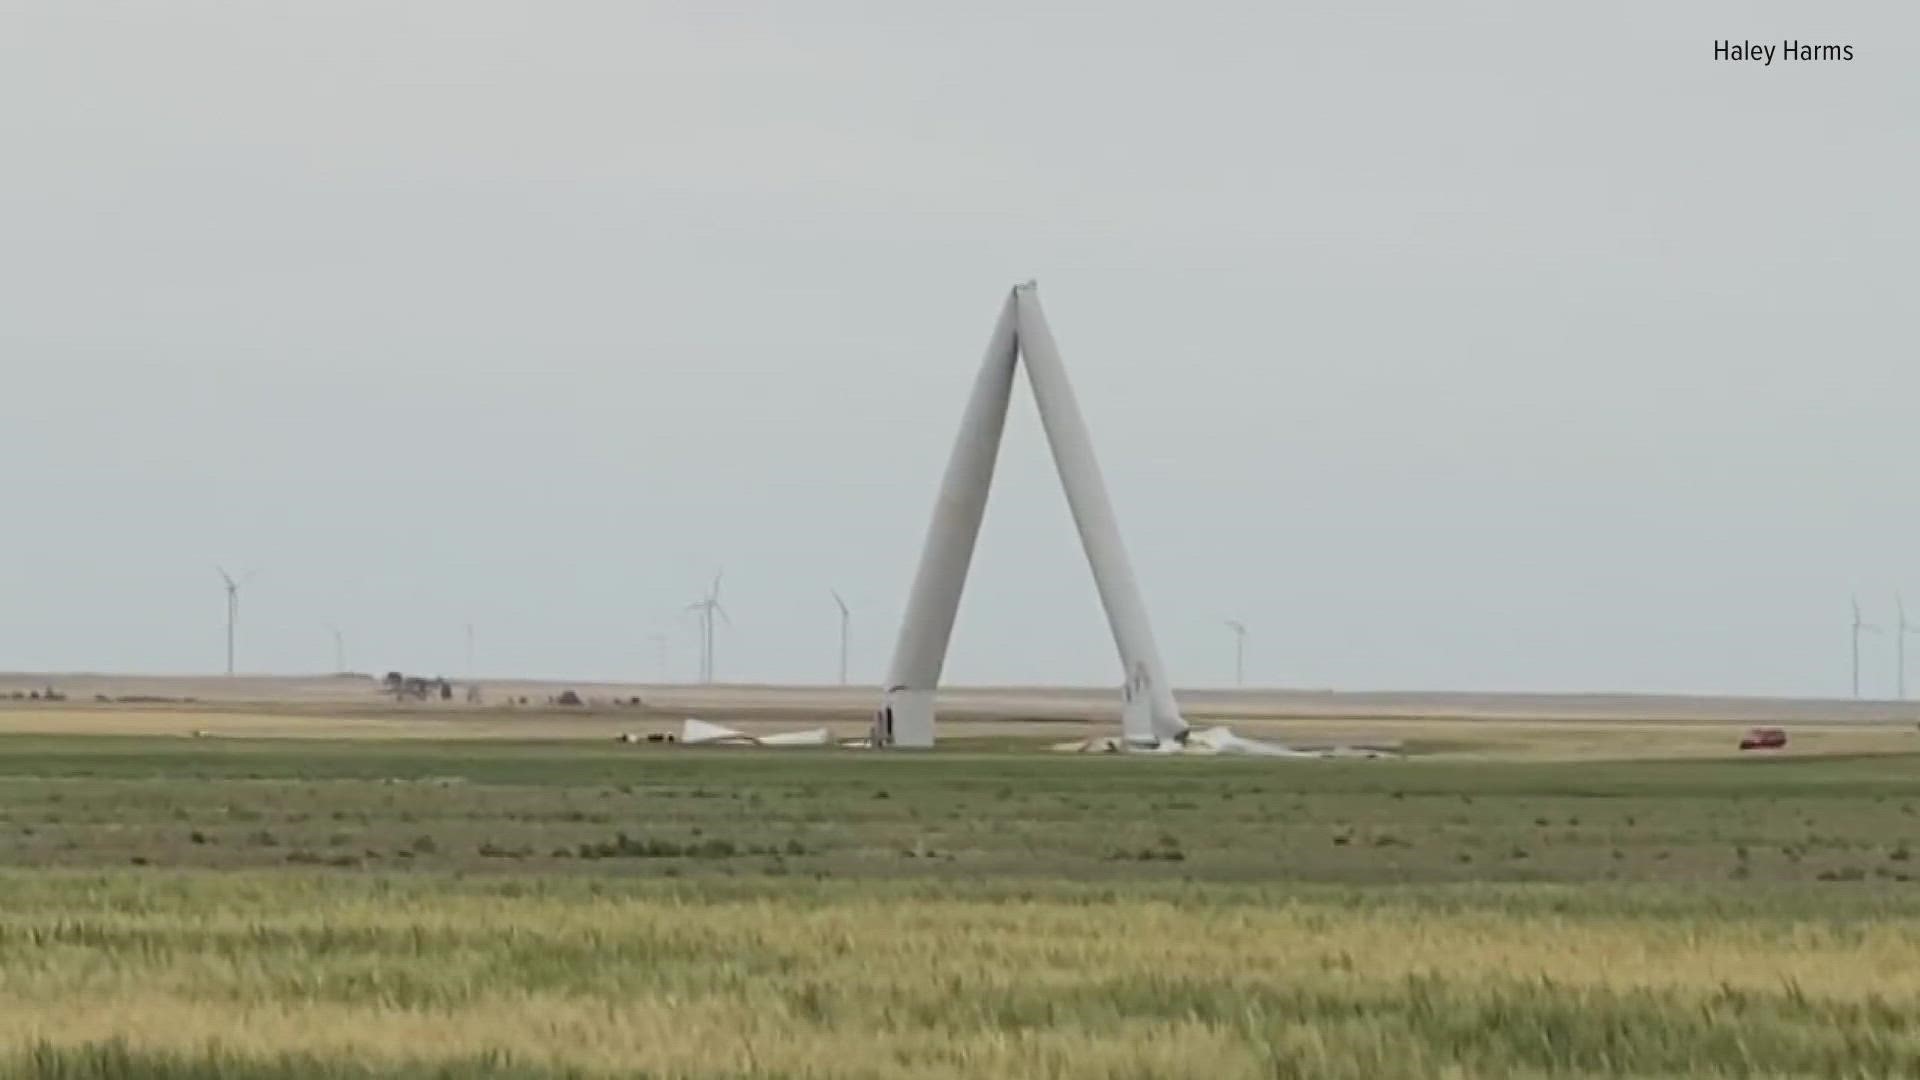 The Florida-based operator of the wind farm on the Eastern Plains said it believes it was an "isolated incident."